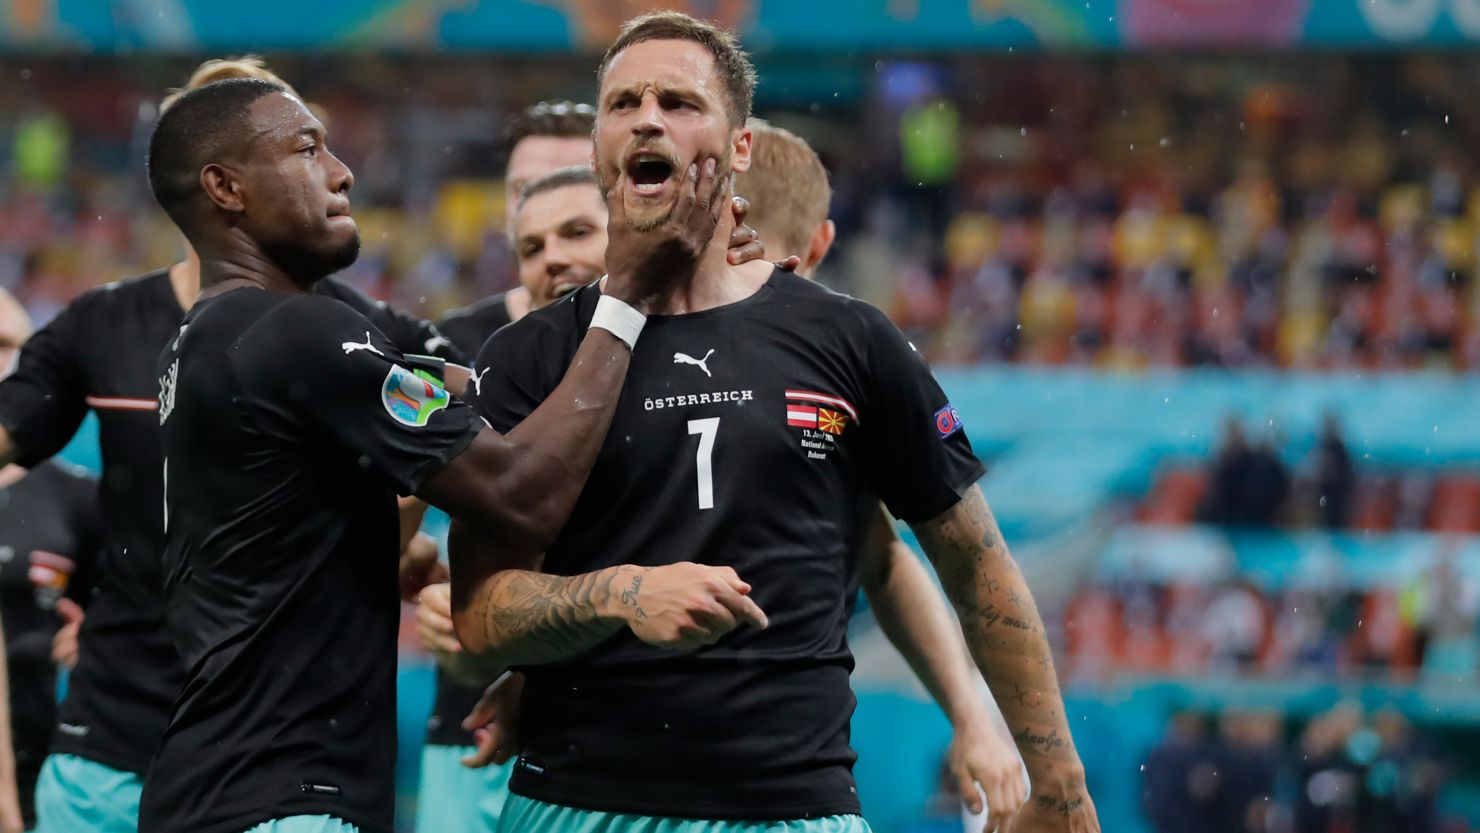 Austria's Marko Arnautovic, right, celebrates after scoring his side's third goal during the Euro 2020 match against Northern Macedonia.